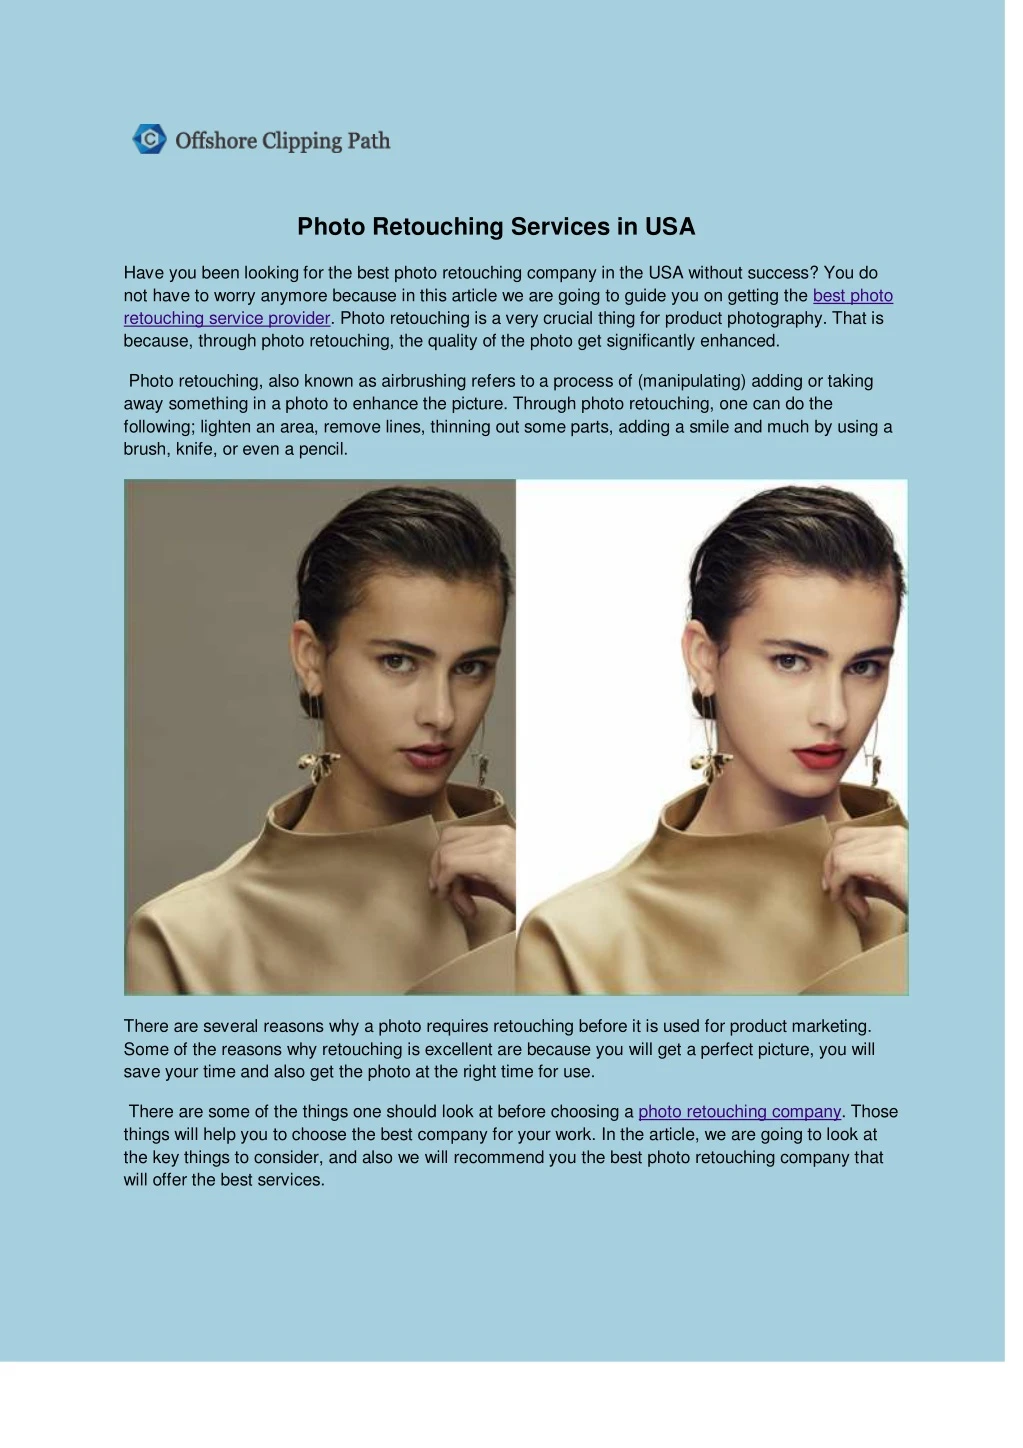 photo retouching services in usa